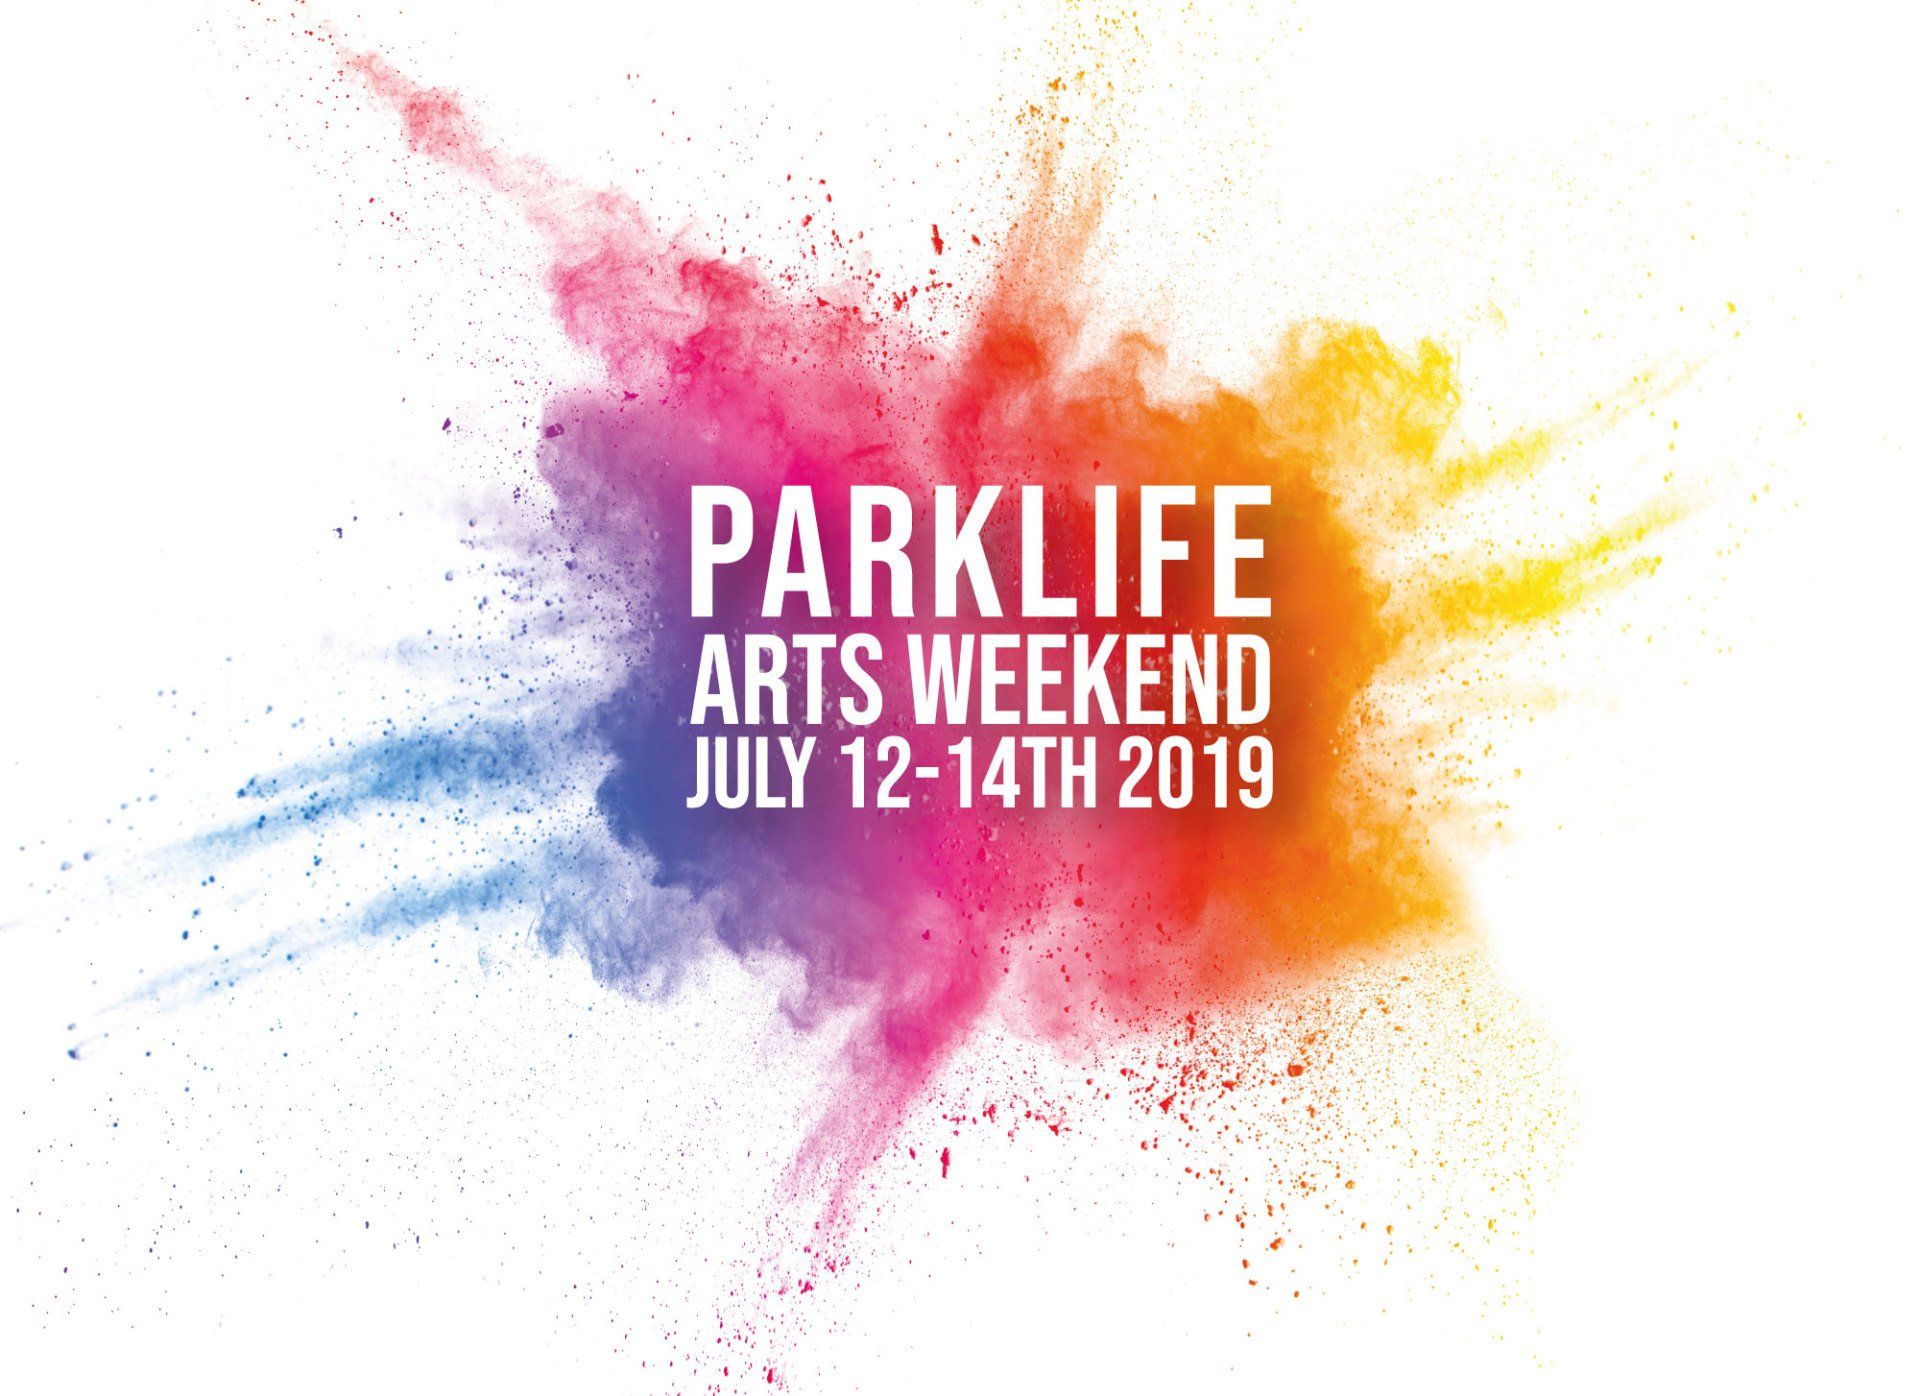 The logo for parklife arts weekend july 12-14th 2019